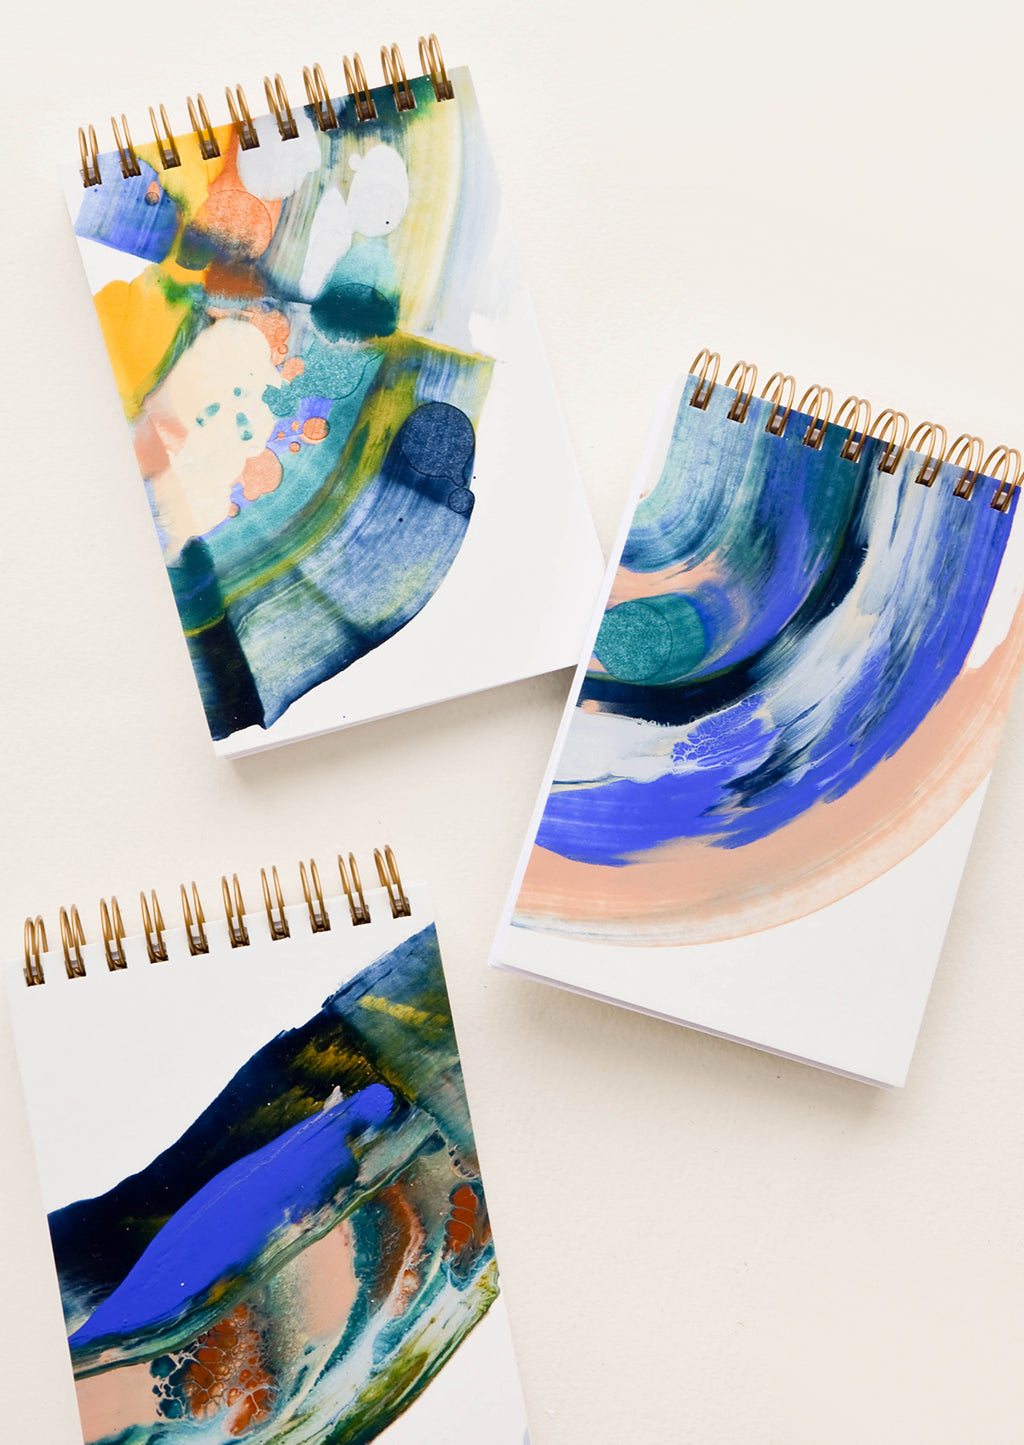 1: Small, pocket-size spiral notepads with covers painted in earth toned paint swirls